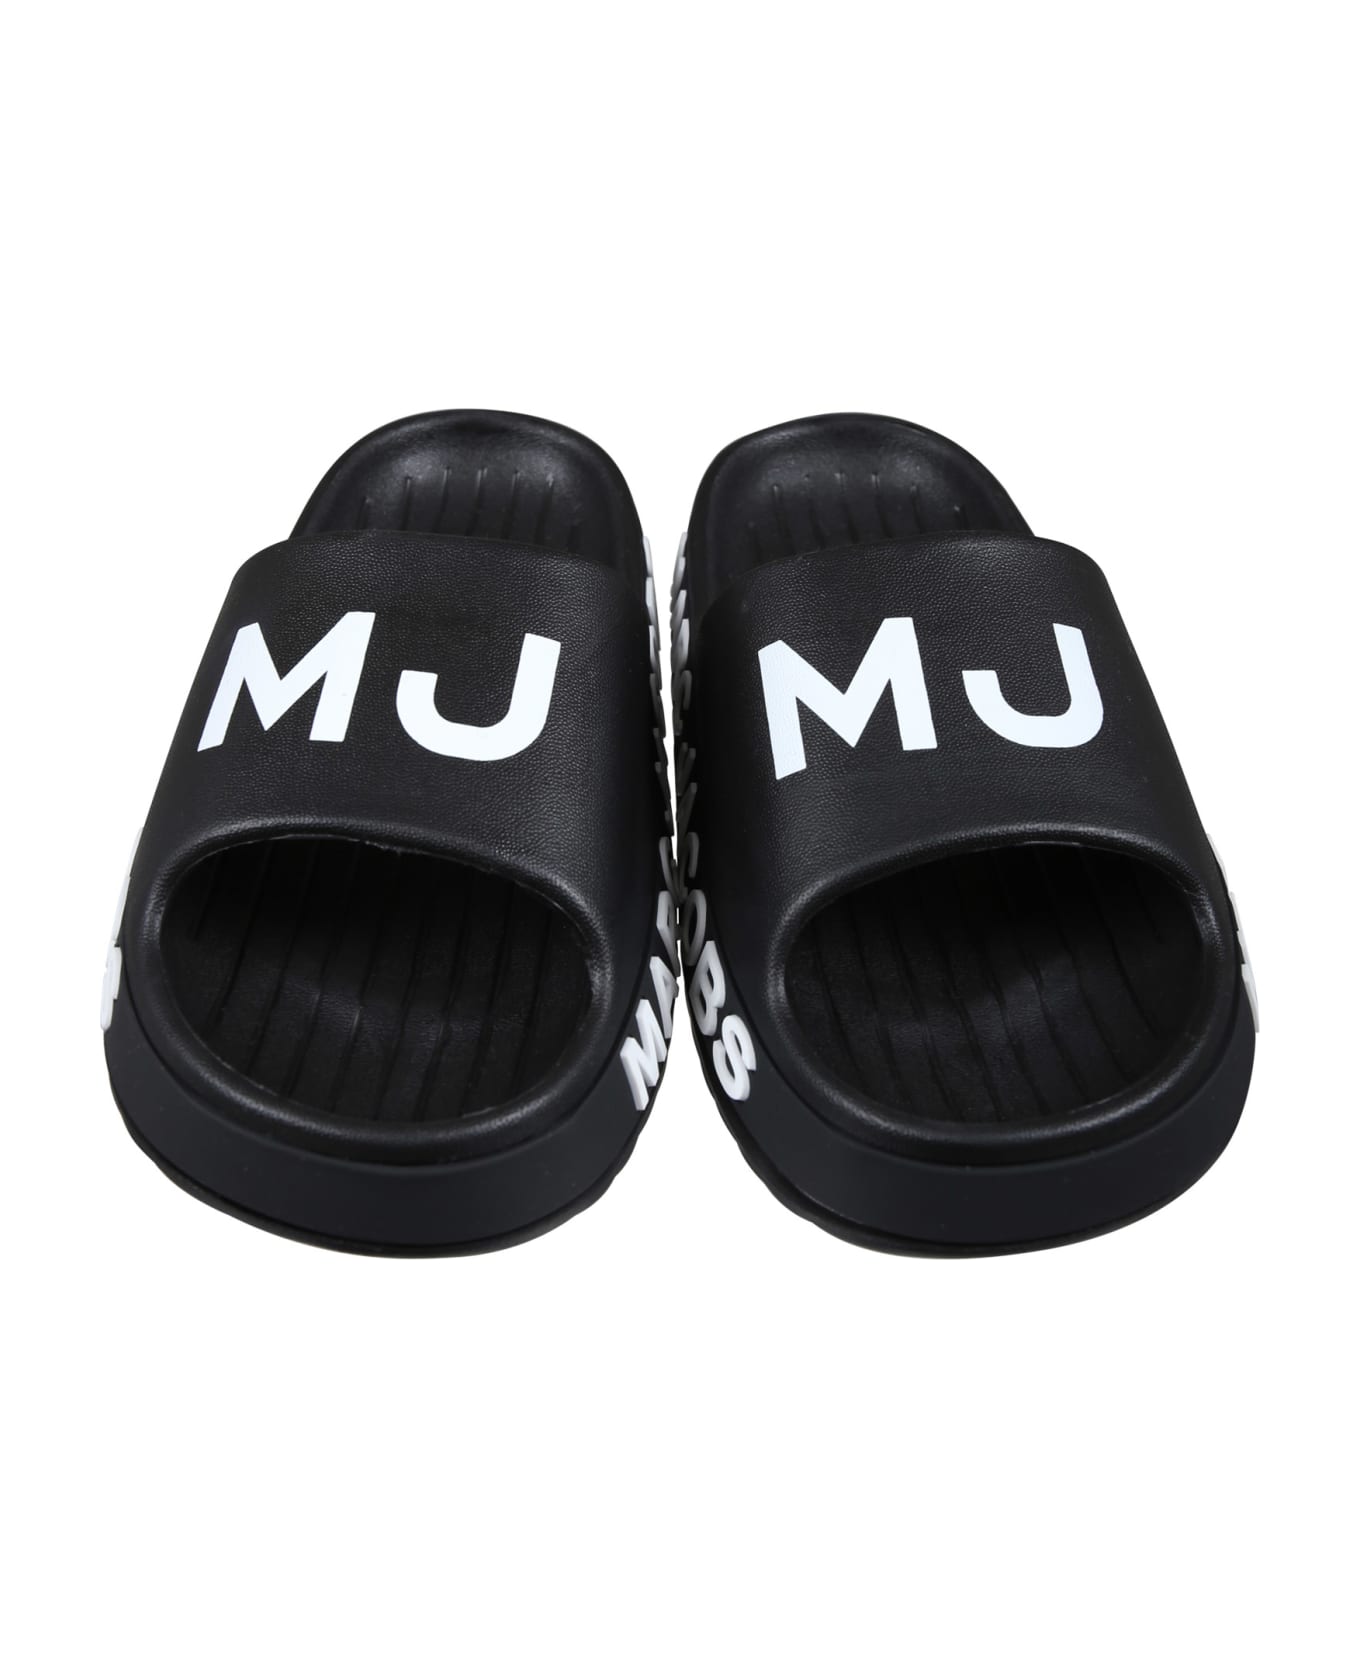 Little Marc Jacobs Black Slippers For Kids With Logo - Nero シューズ